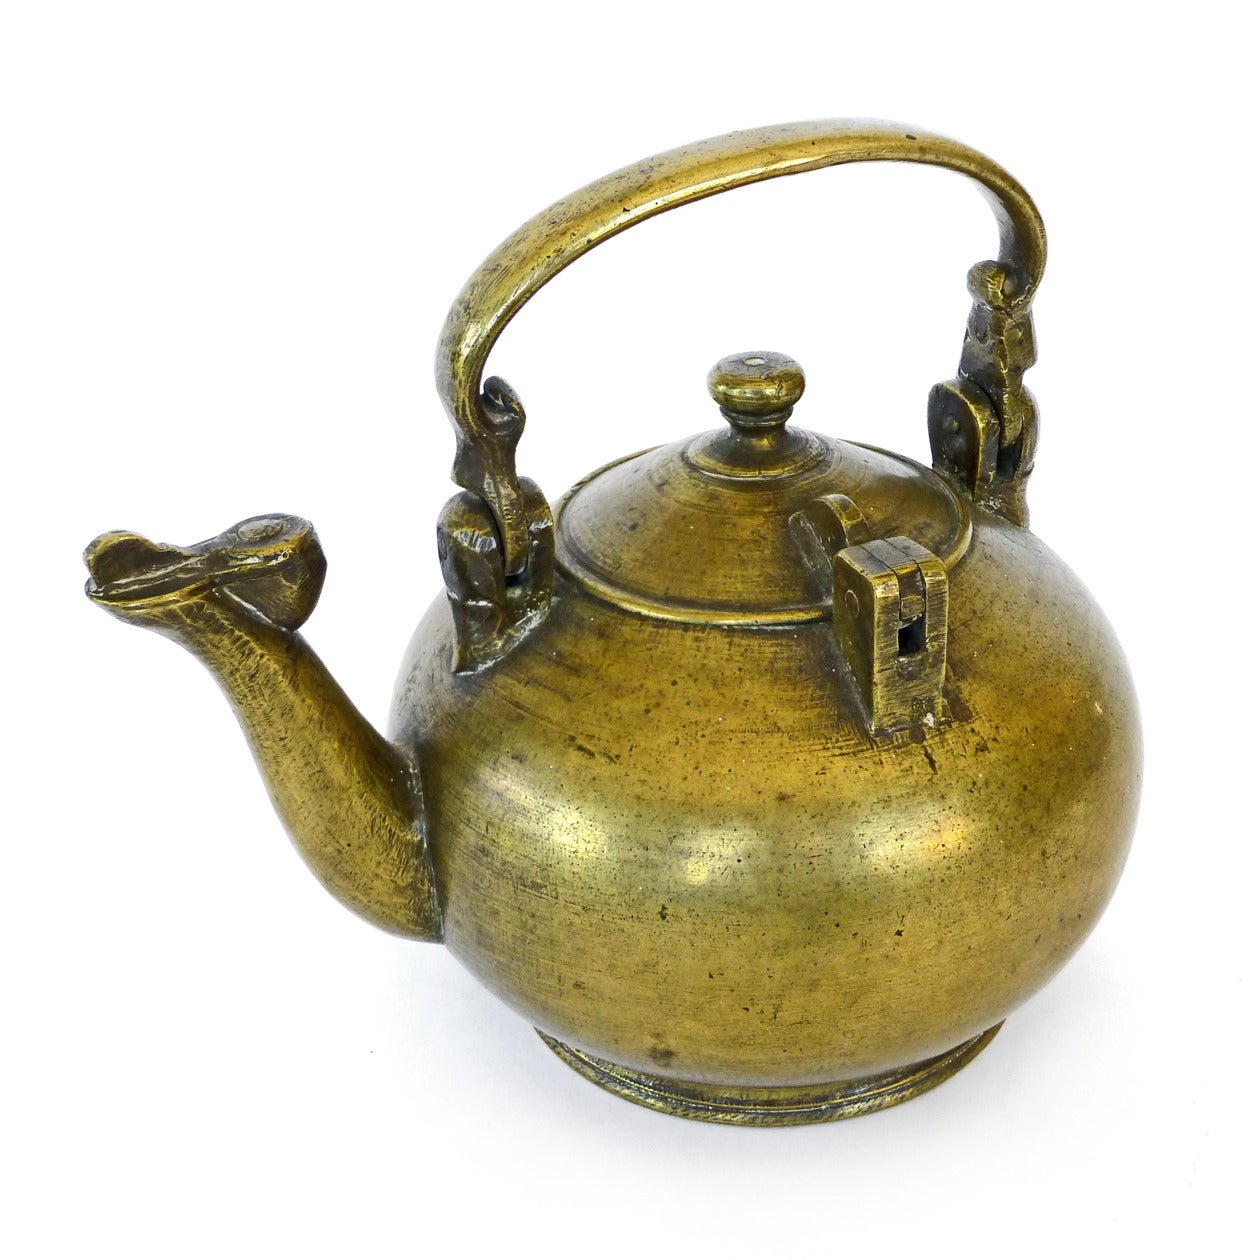 Chinese bronze cast water kettle, circa 1820.